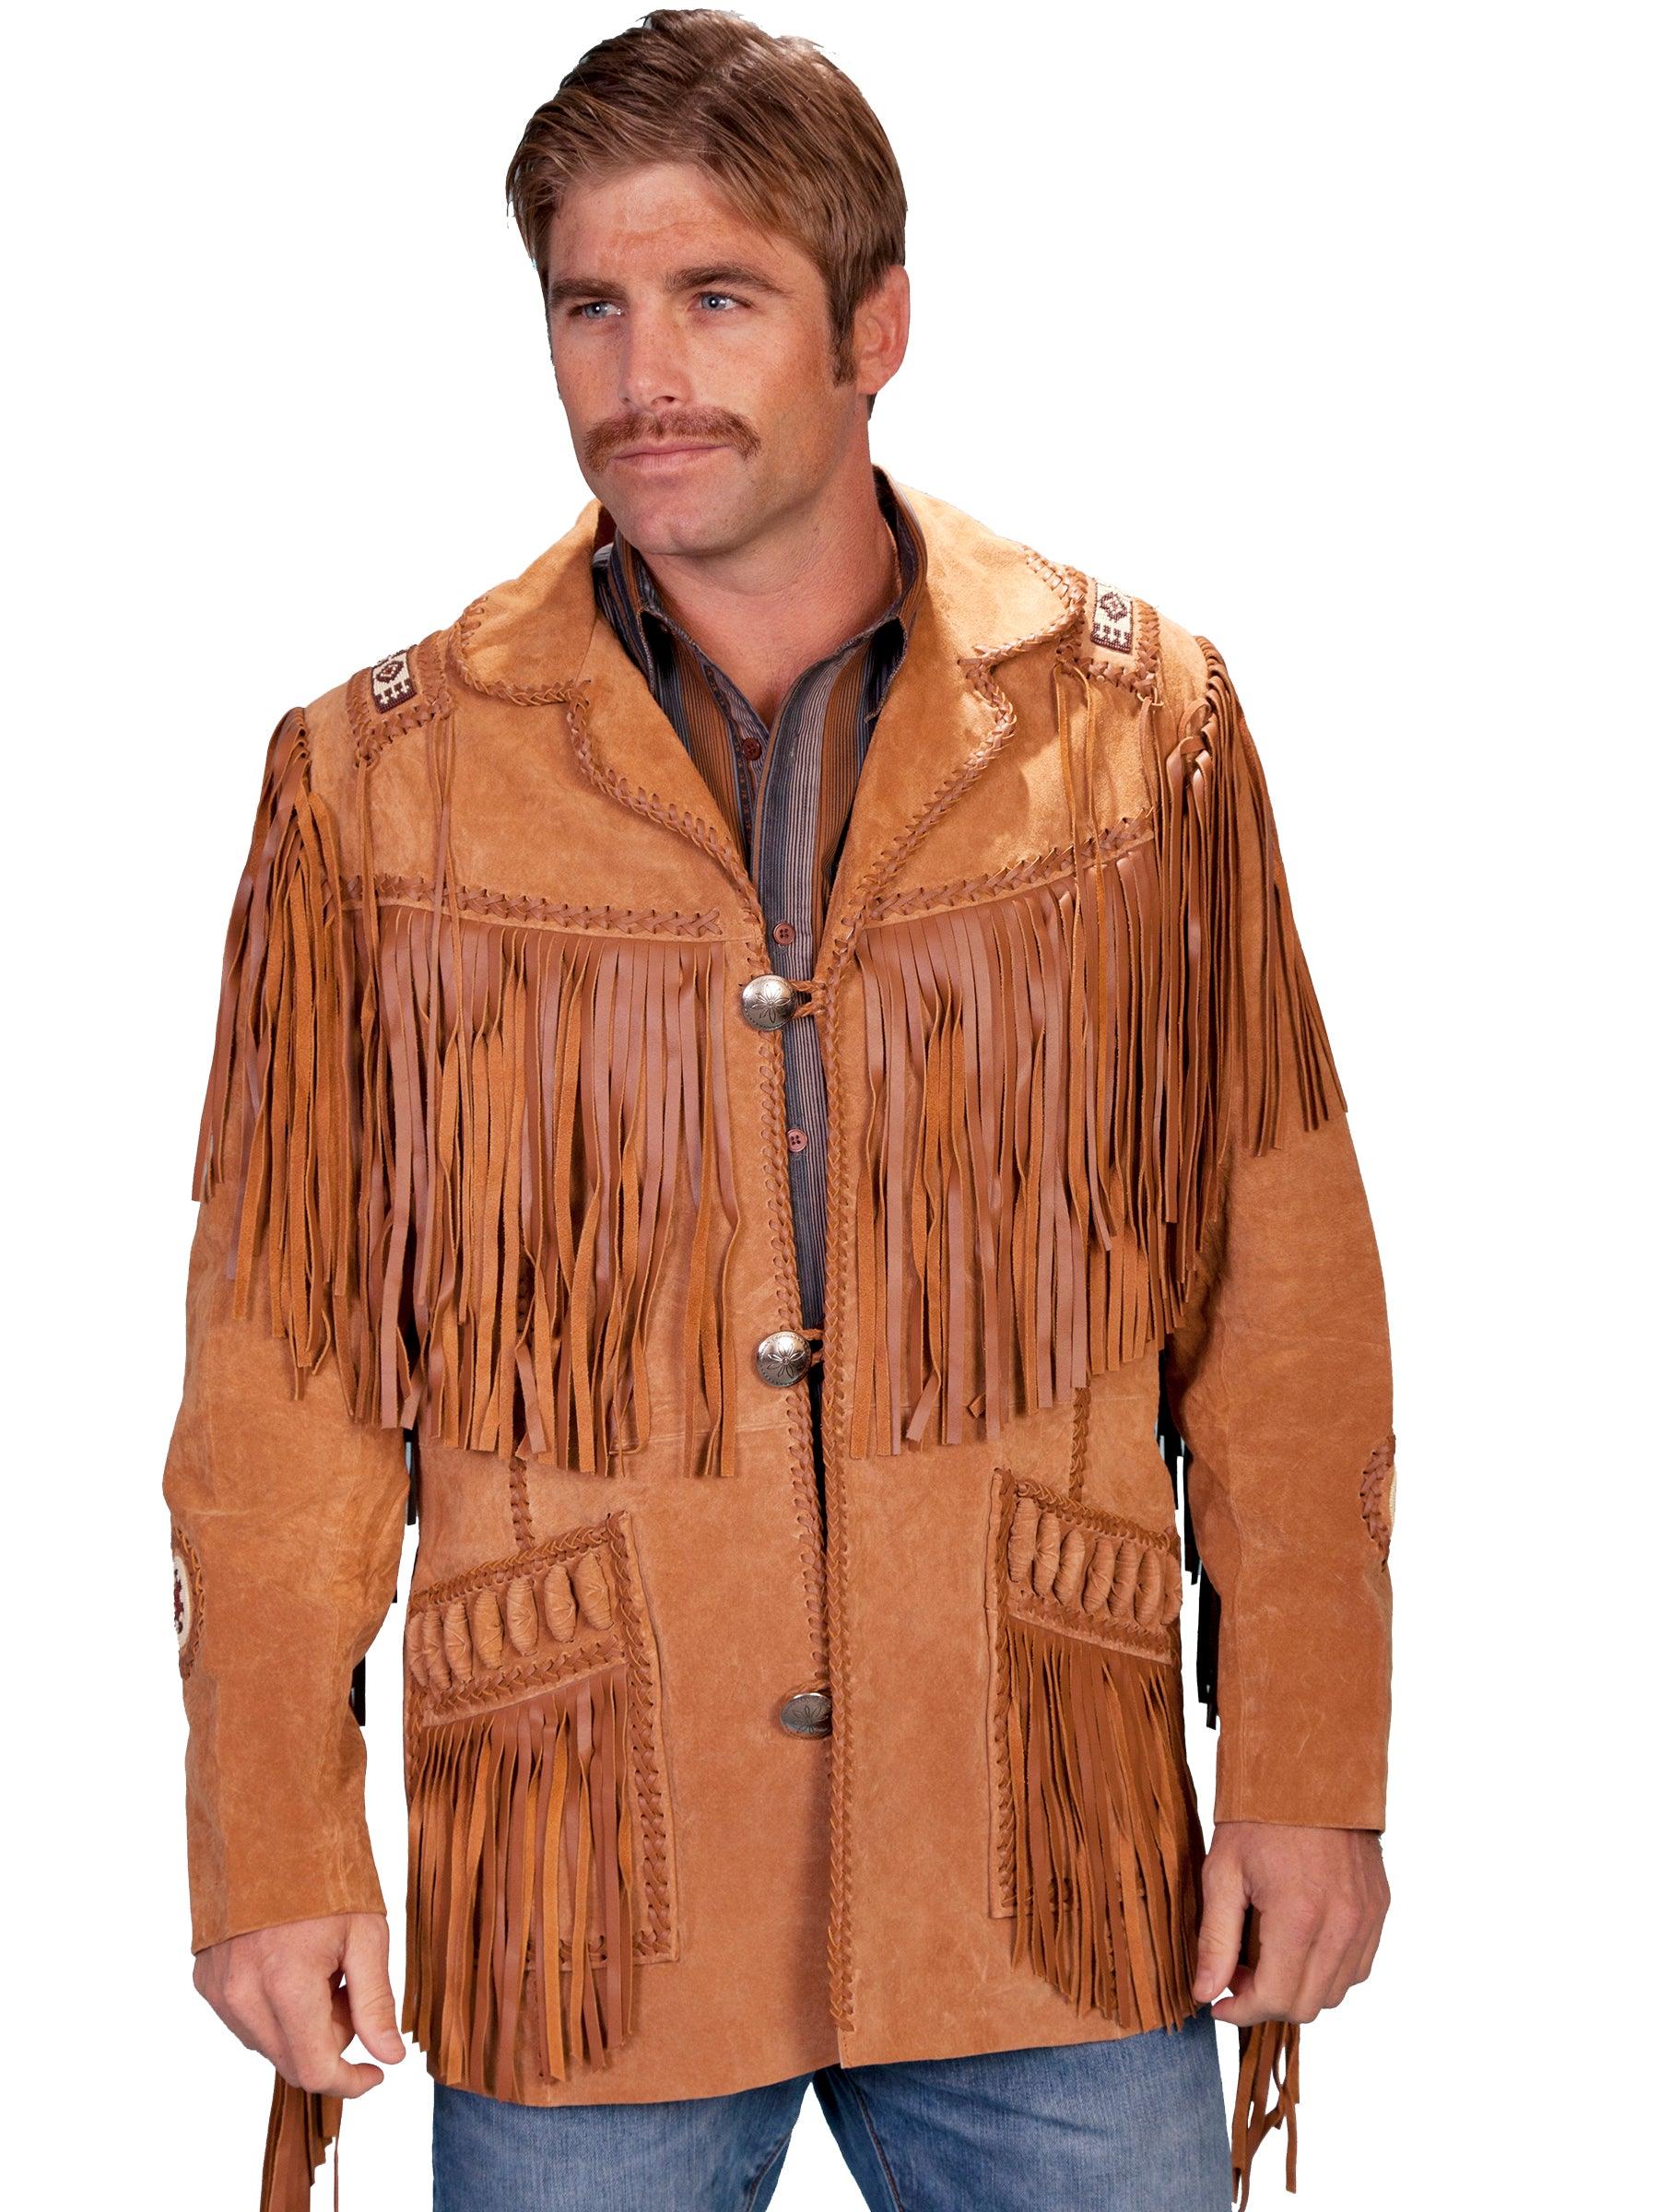 Scully BOURBON BOAR SUEDE HAND LACED BEAD TRIM COAT - Flyclothing LLC